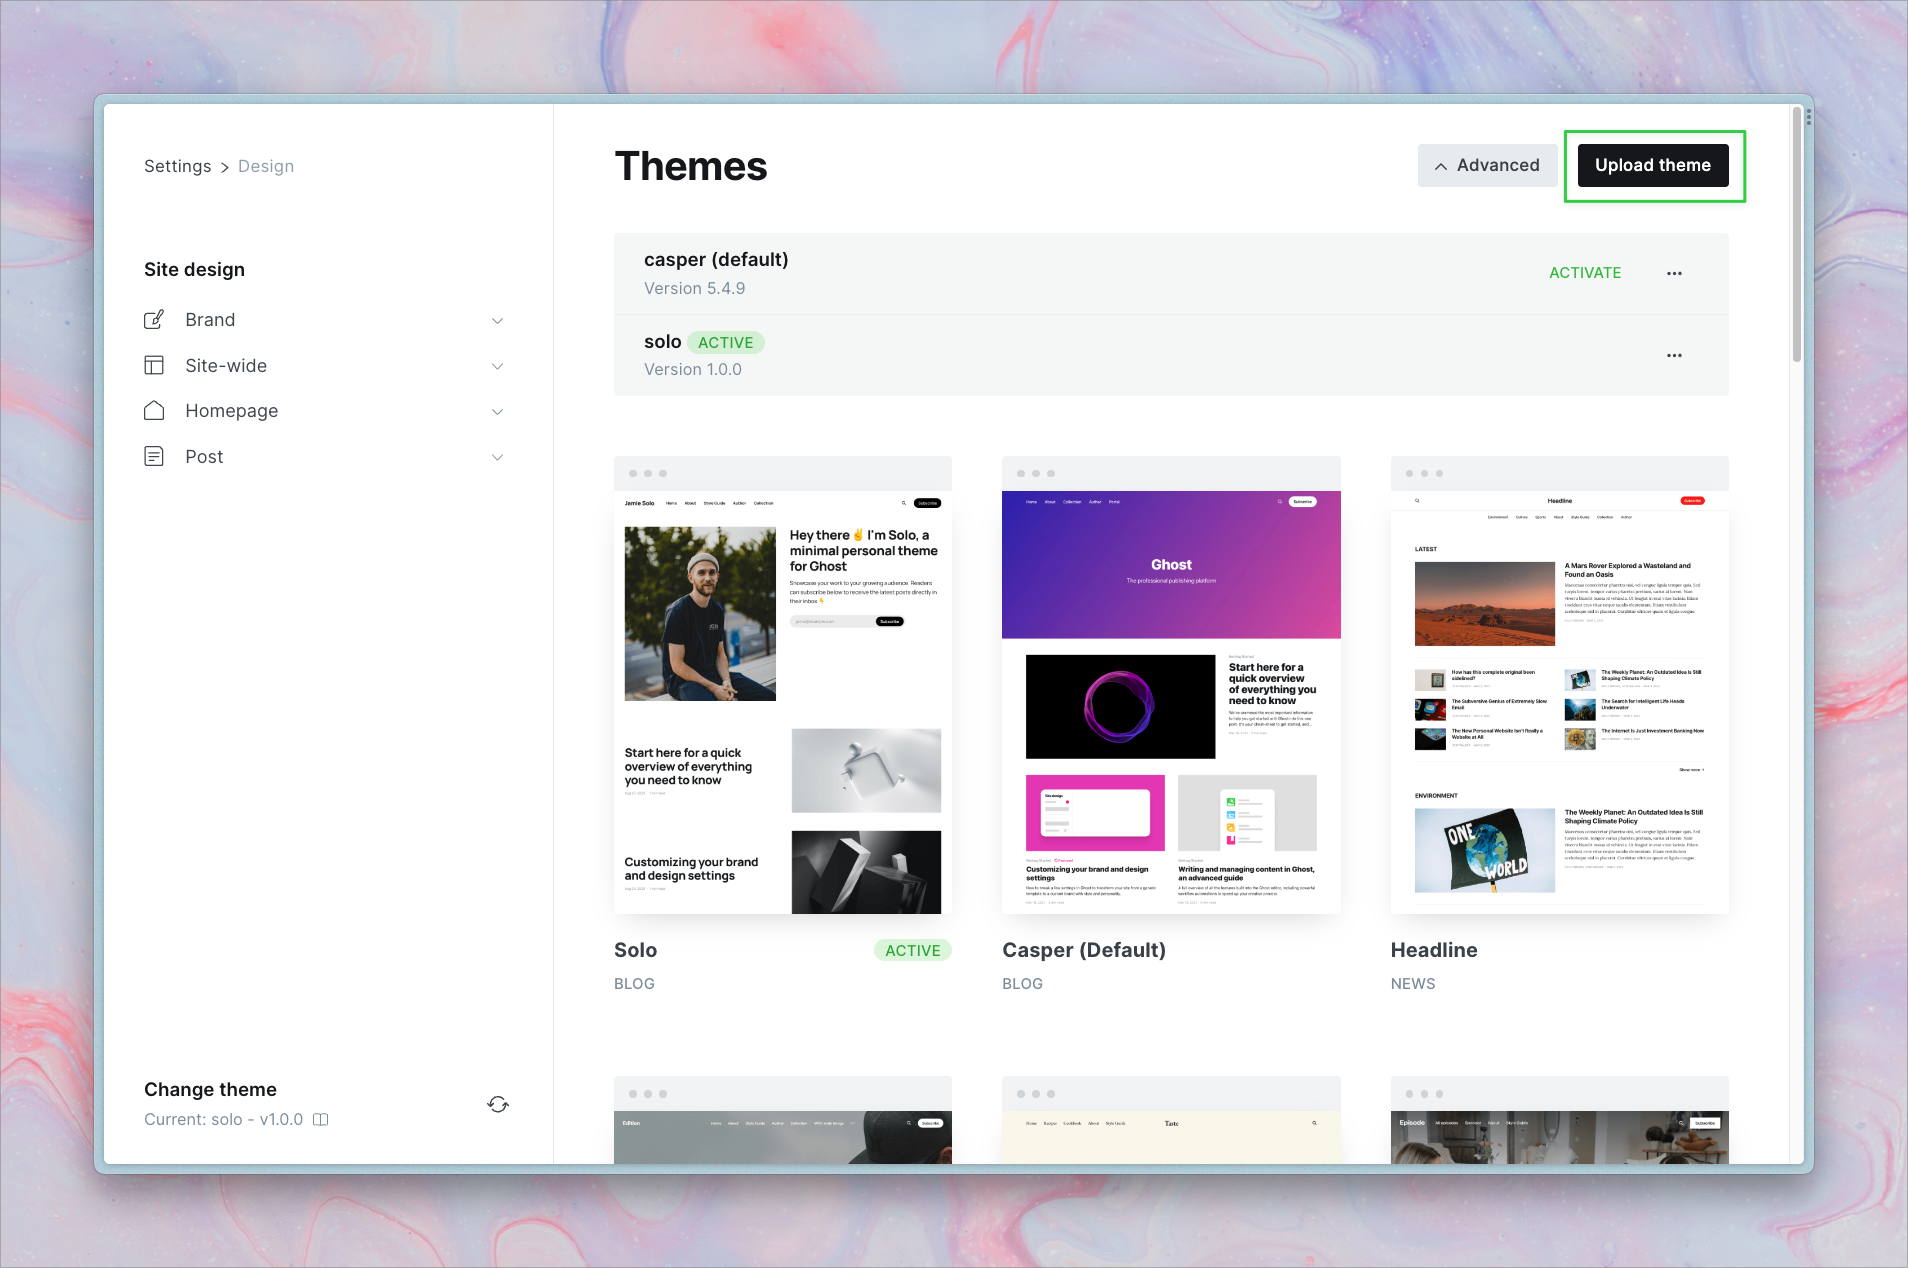 Themes page with Upload theme button highlighted